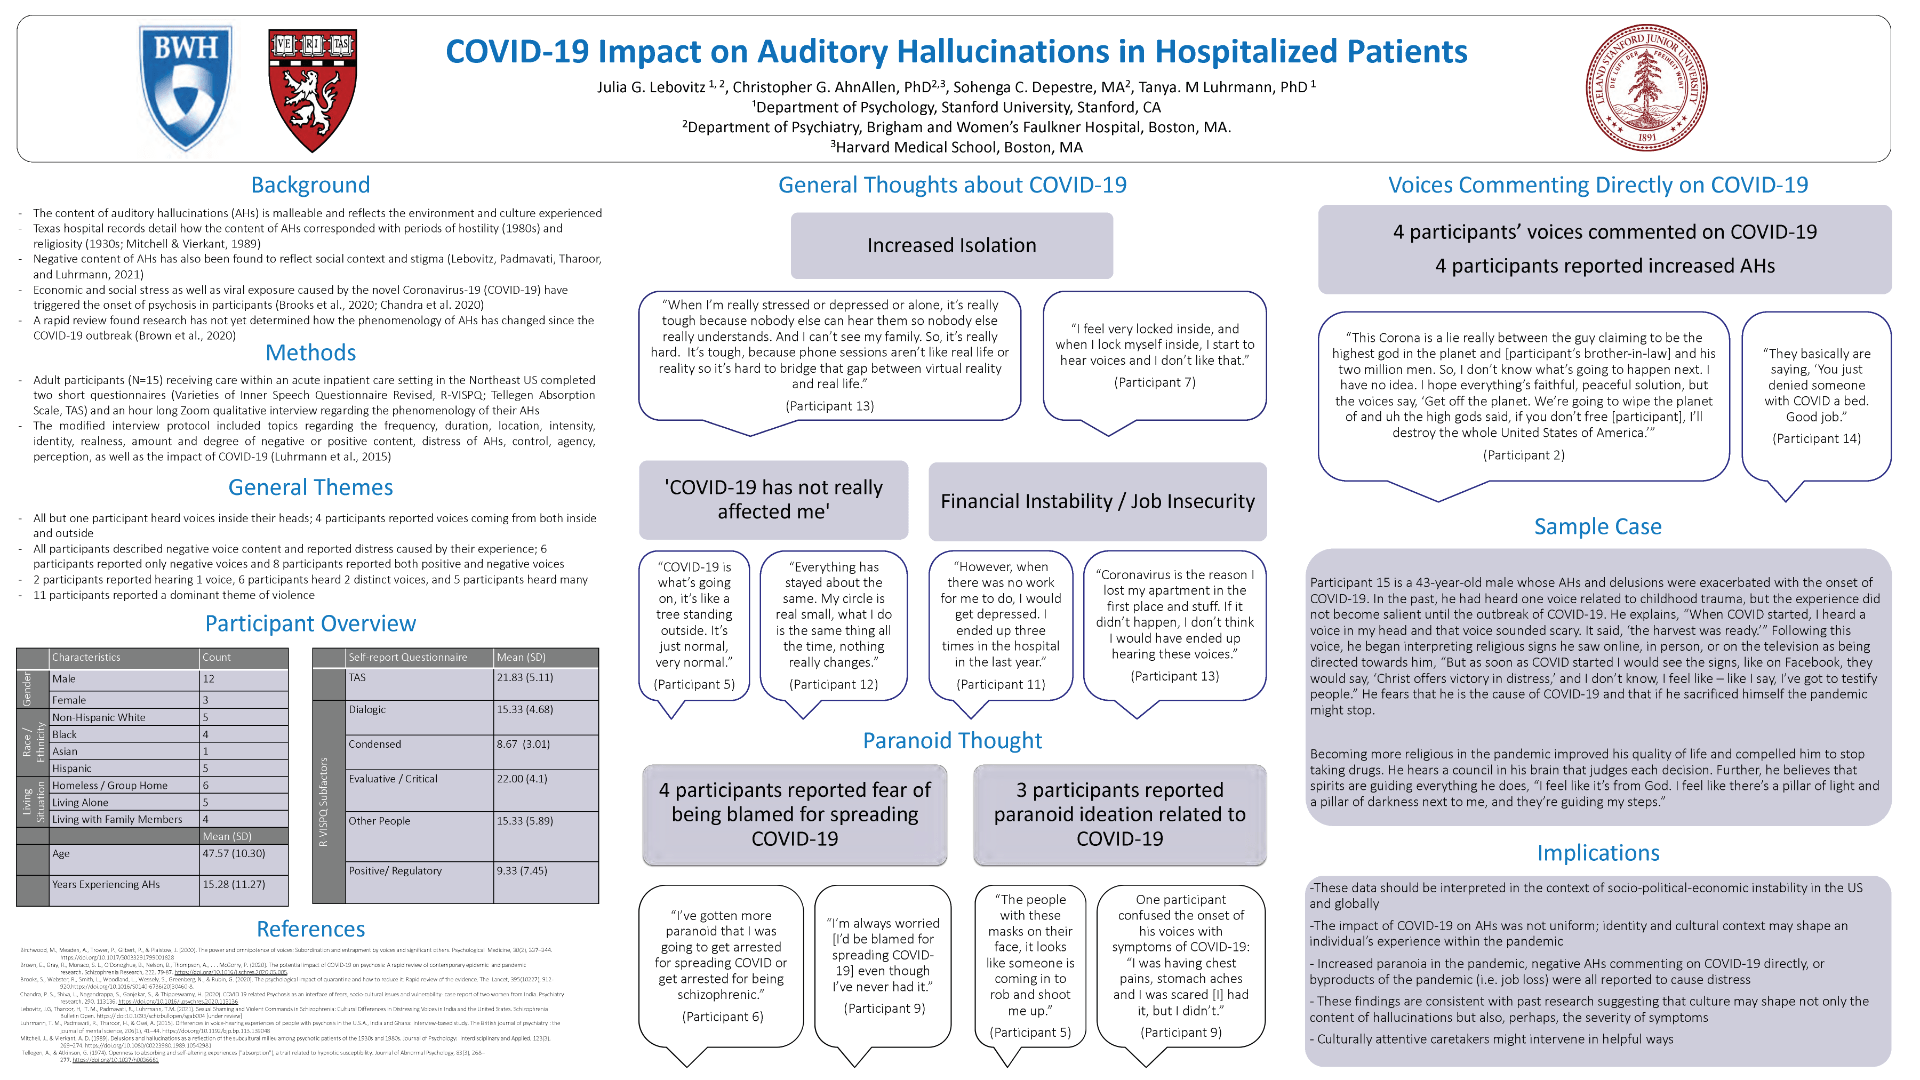 Auditory Hallucinations During the COVID-19 Pandemic in Hospitalized Patients